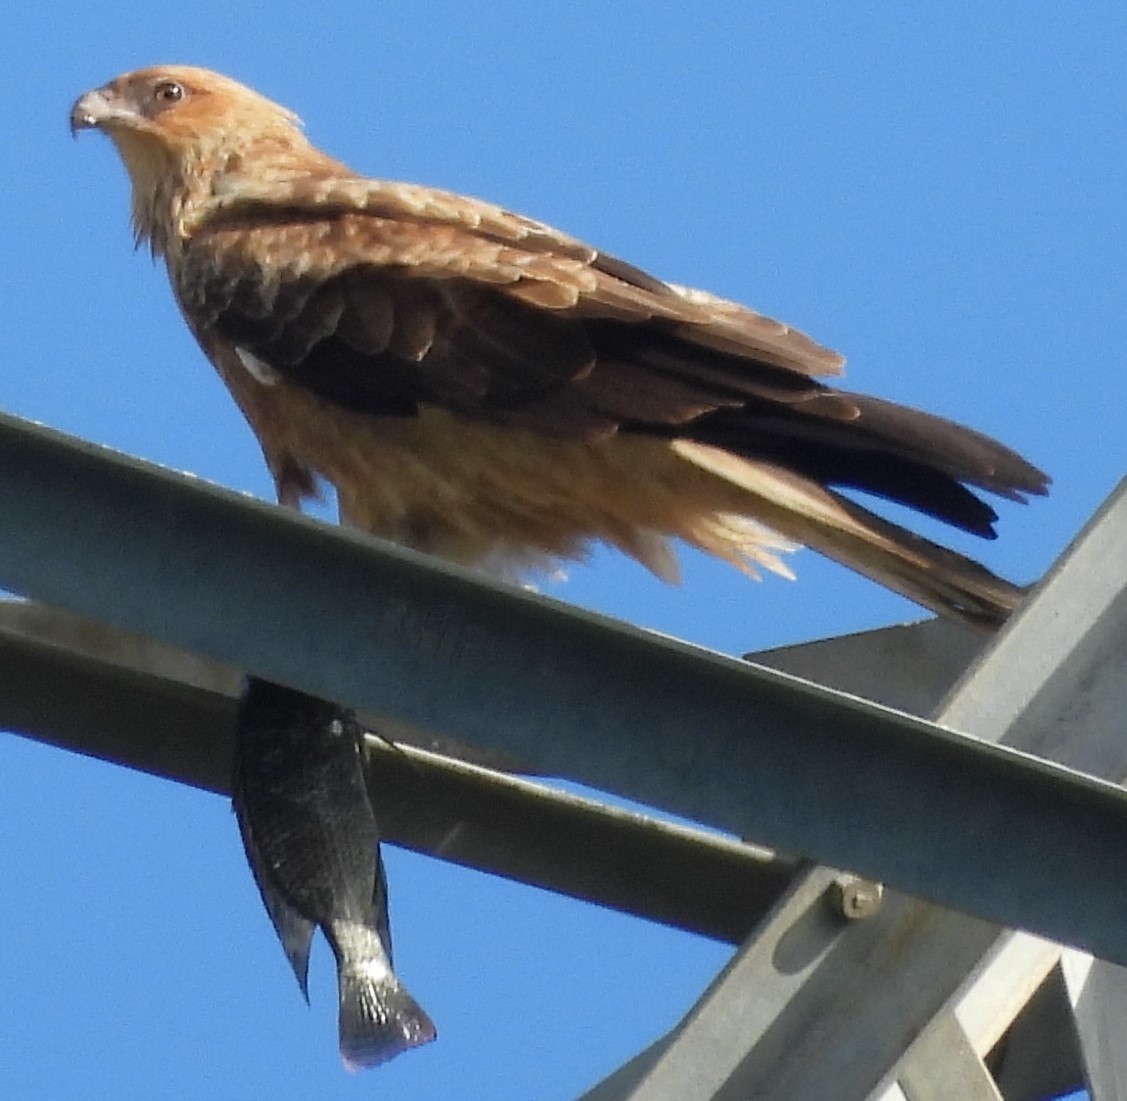 Whistling Kite - Suzanne Foley